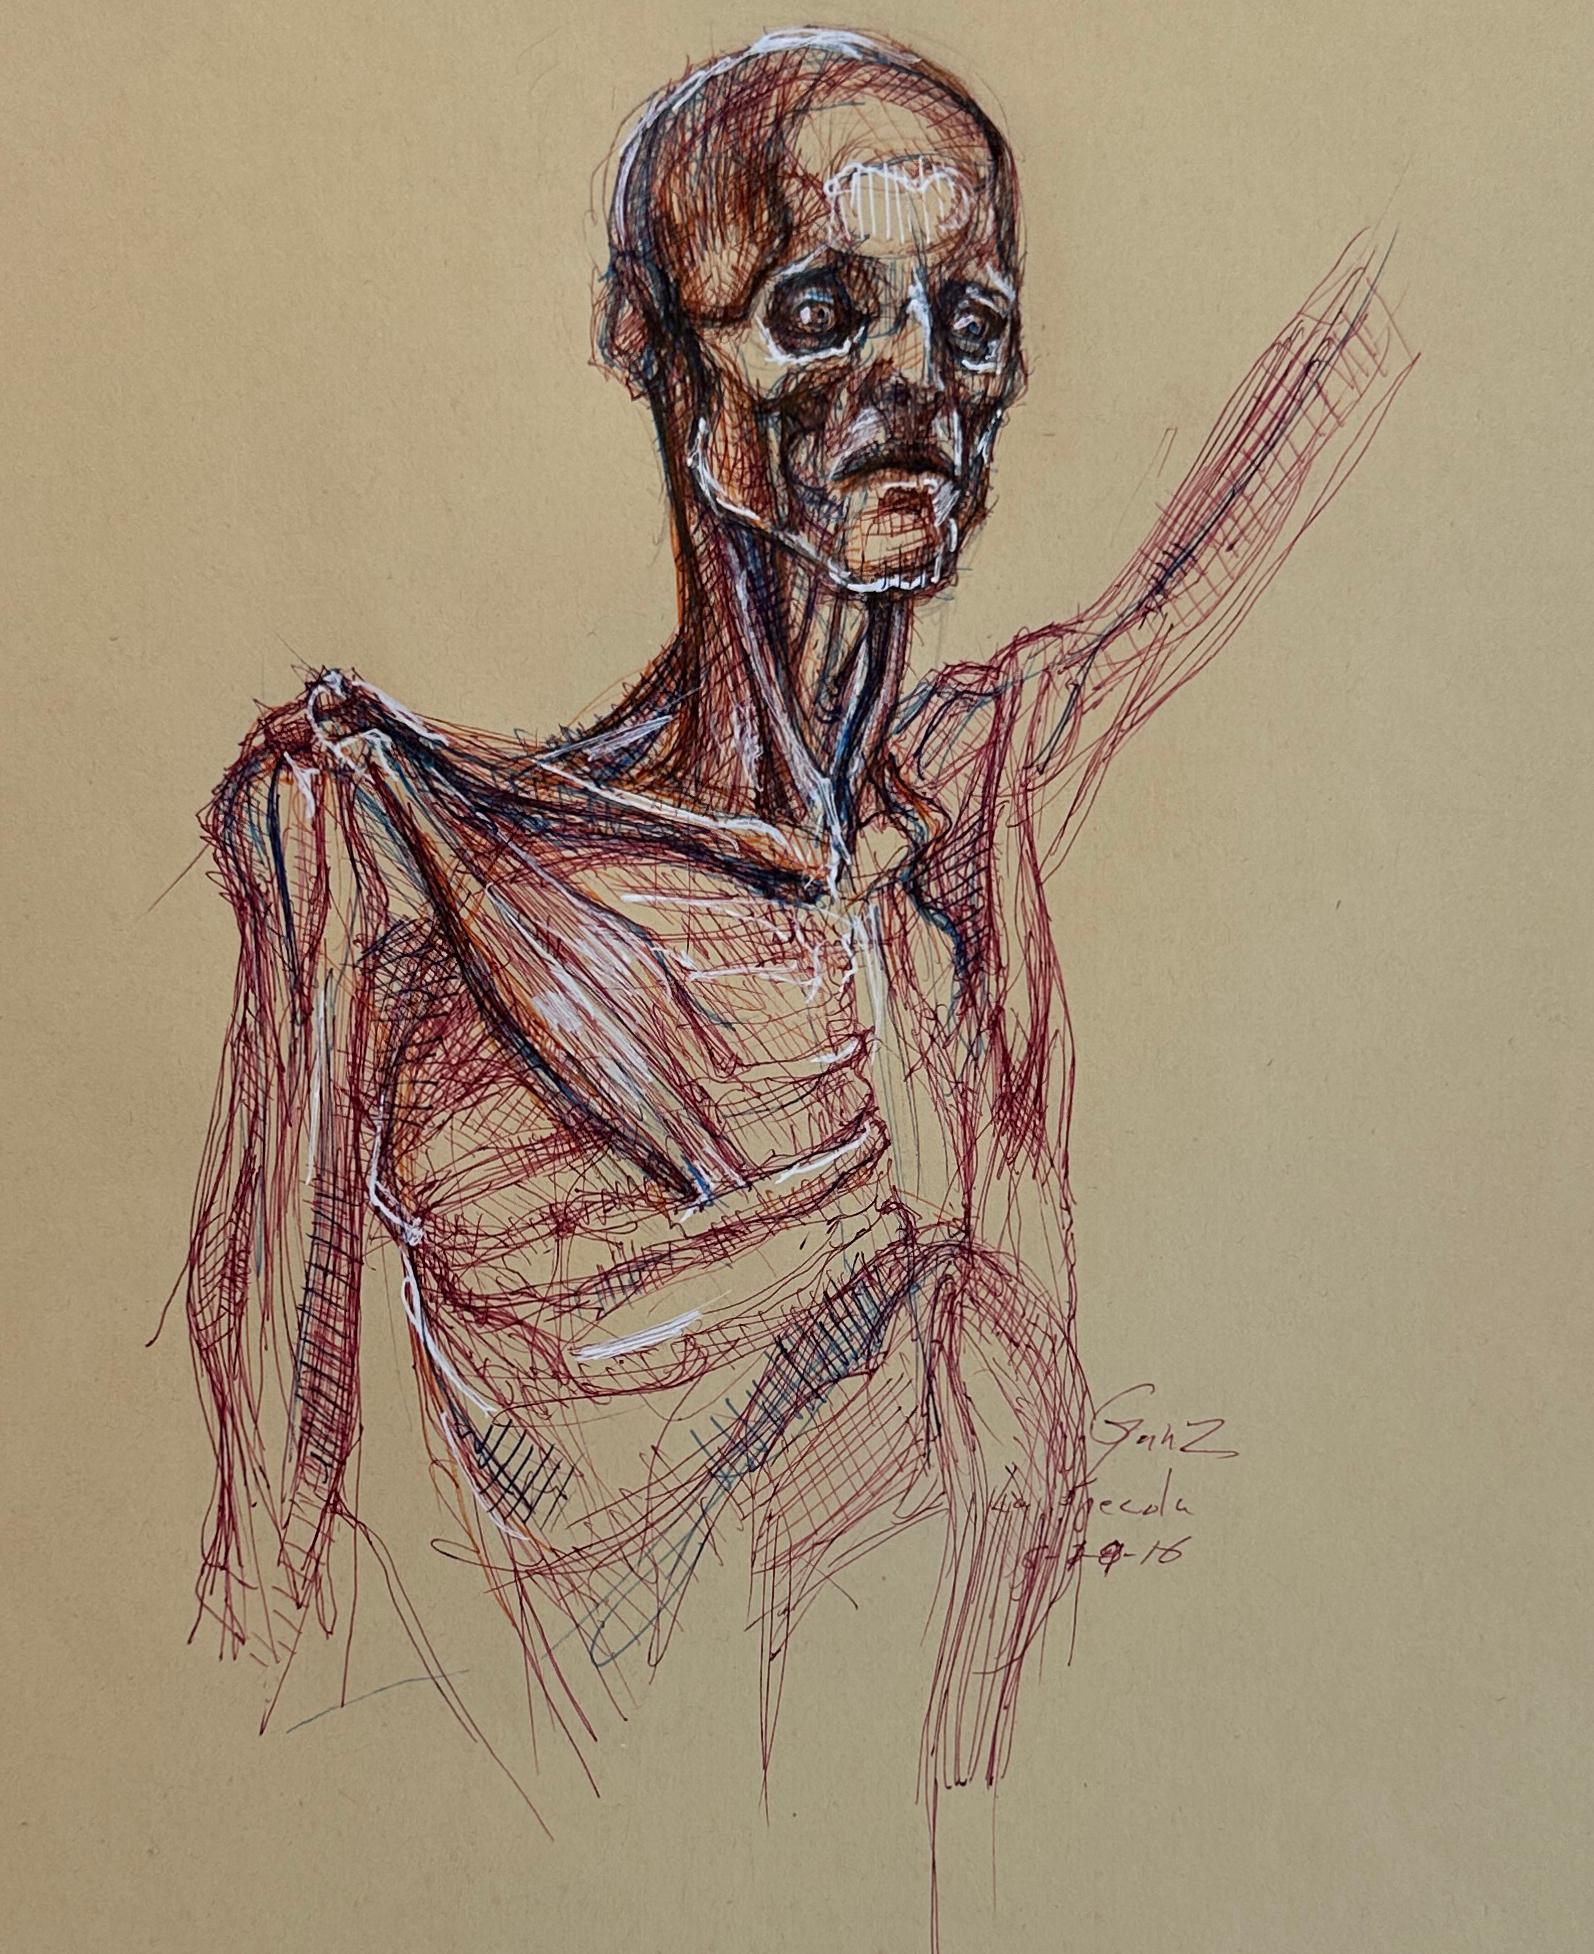 Christopher Ganz Figurative Art - Flayed Wax-Cast Figure - Original Ink Drawing, Matted and Signed